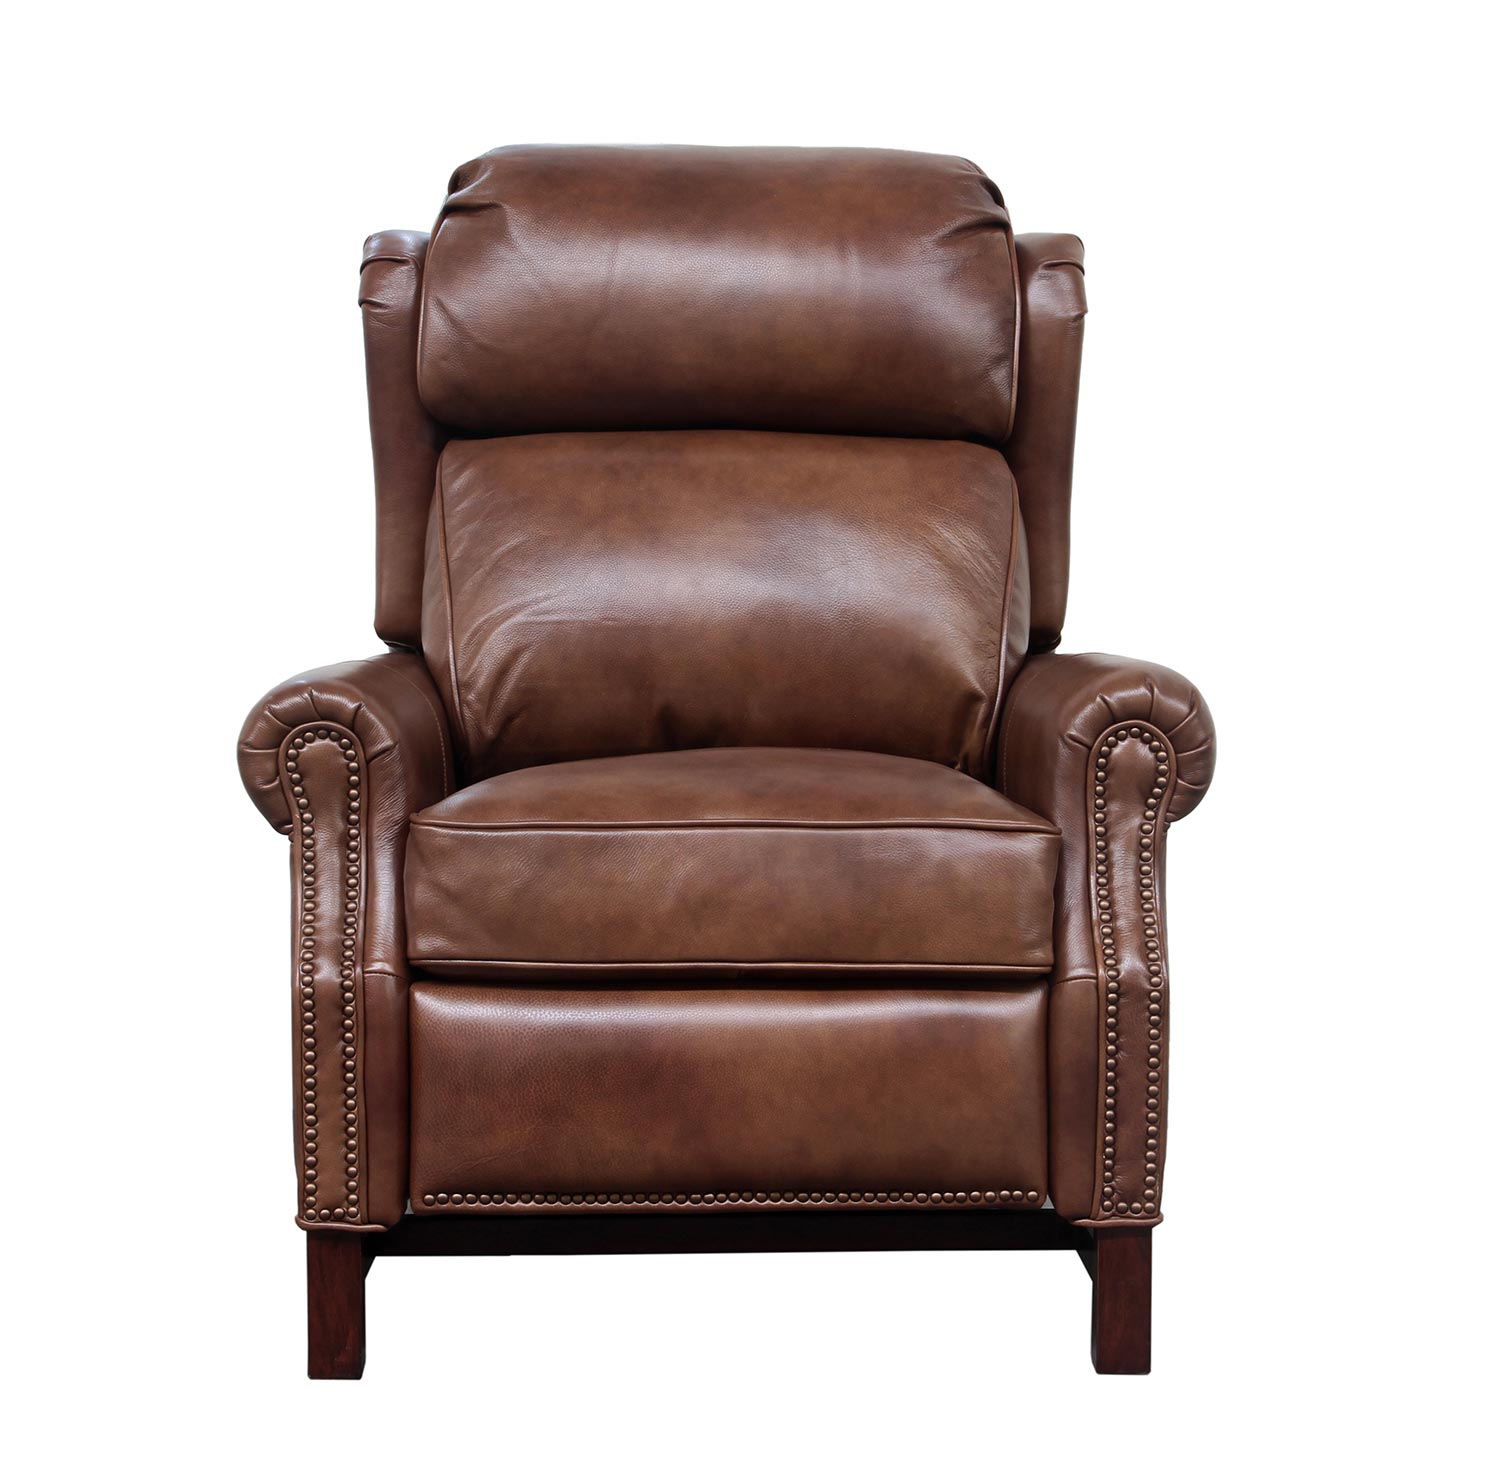 Barcalounger Thornfield Recliner Chair - Wenlock Tawny/All Leather